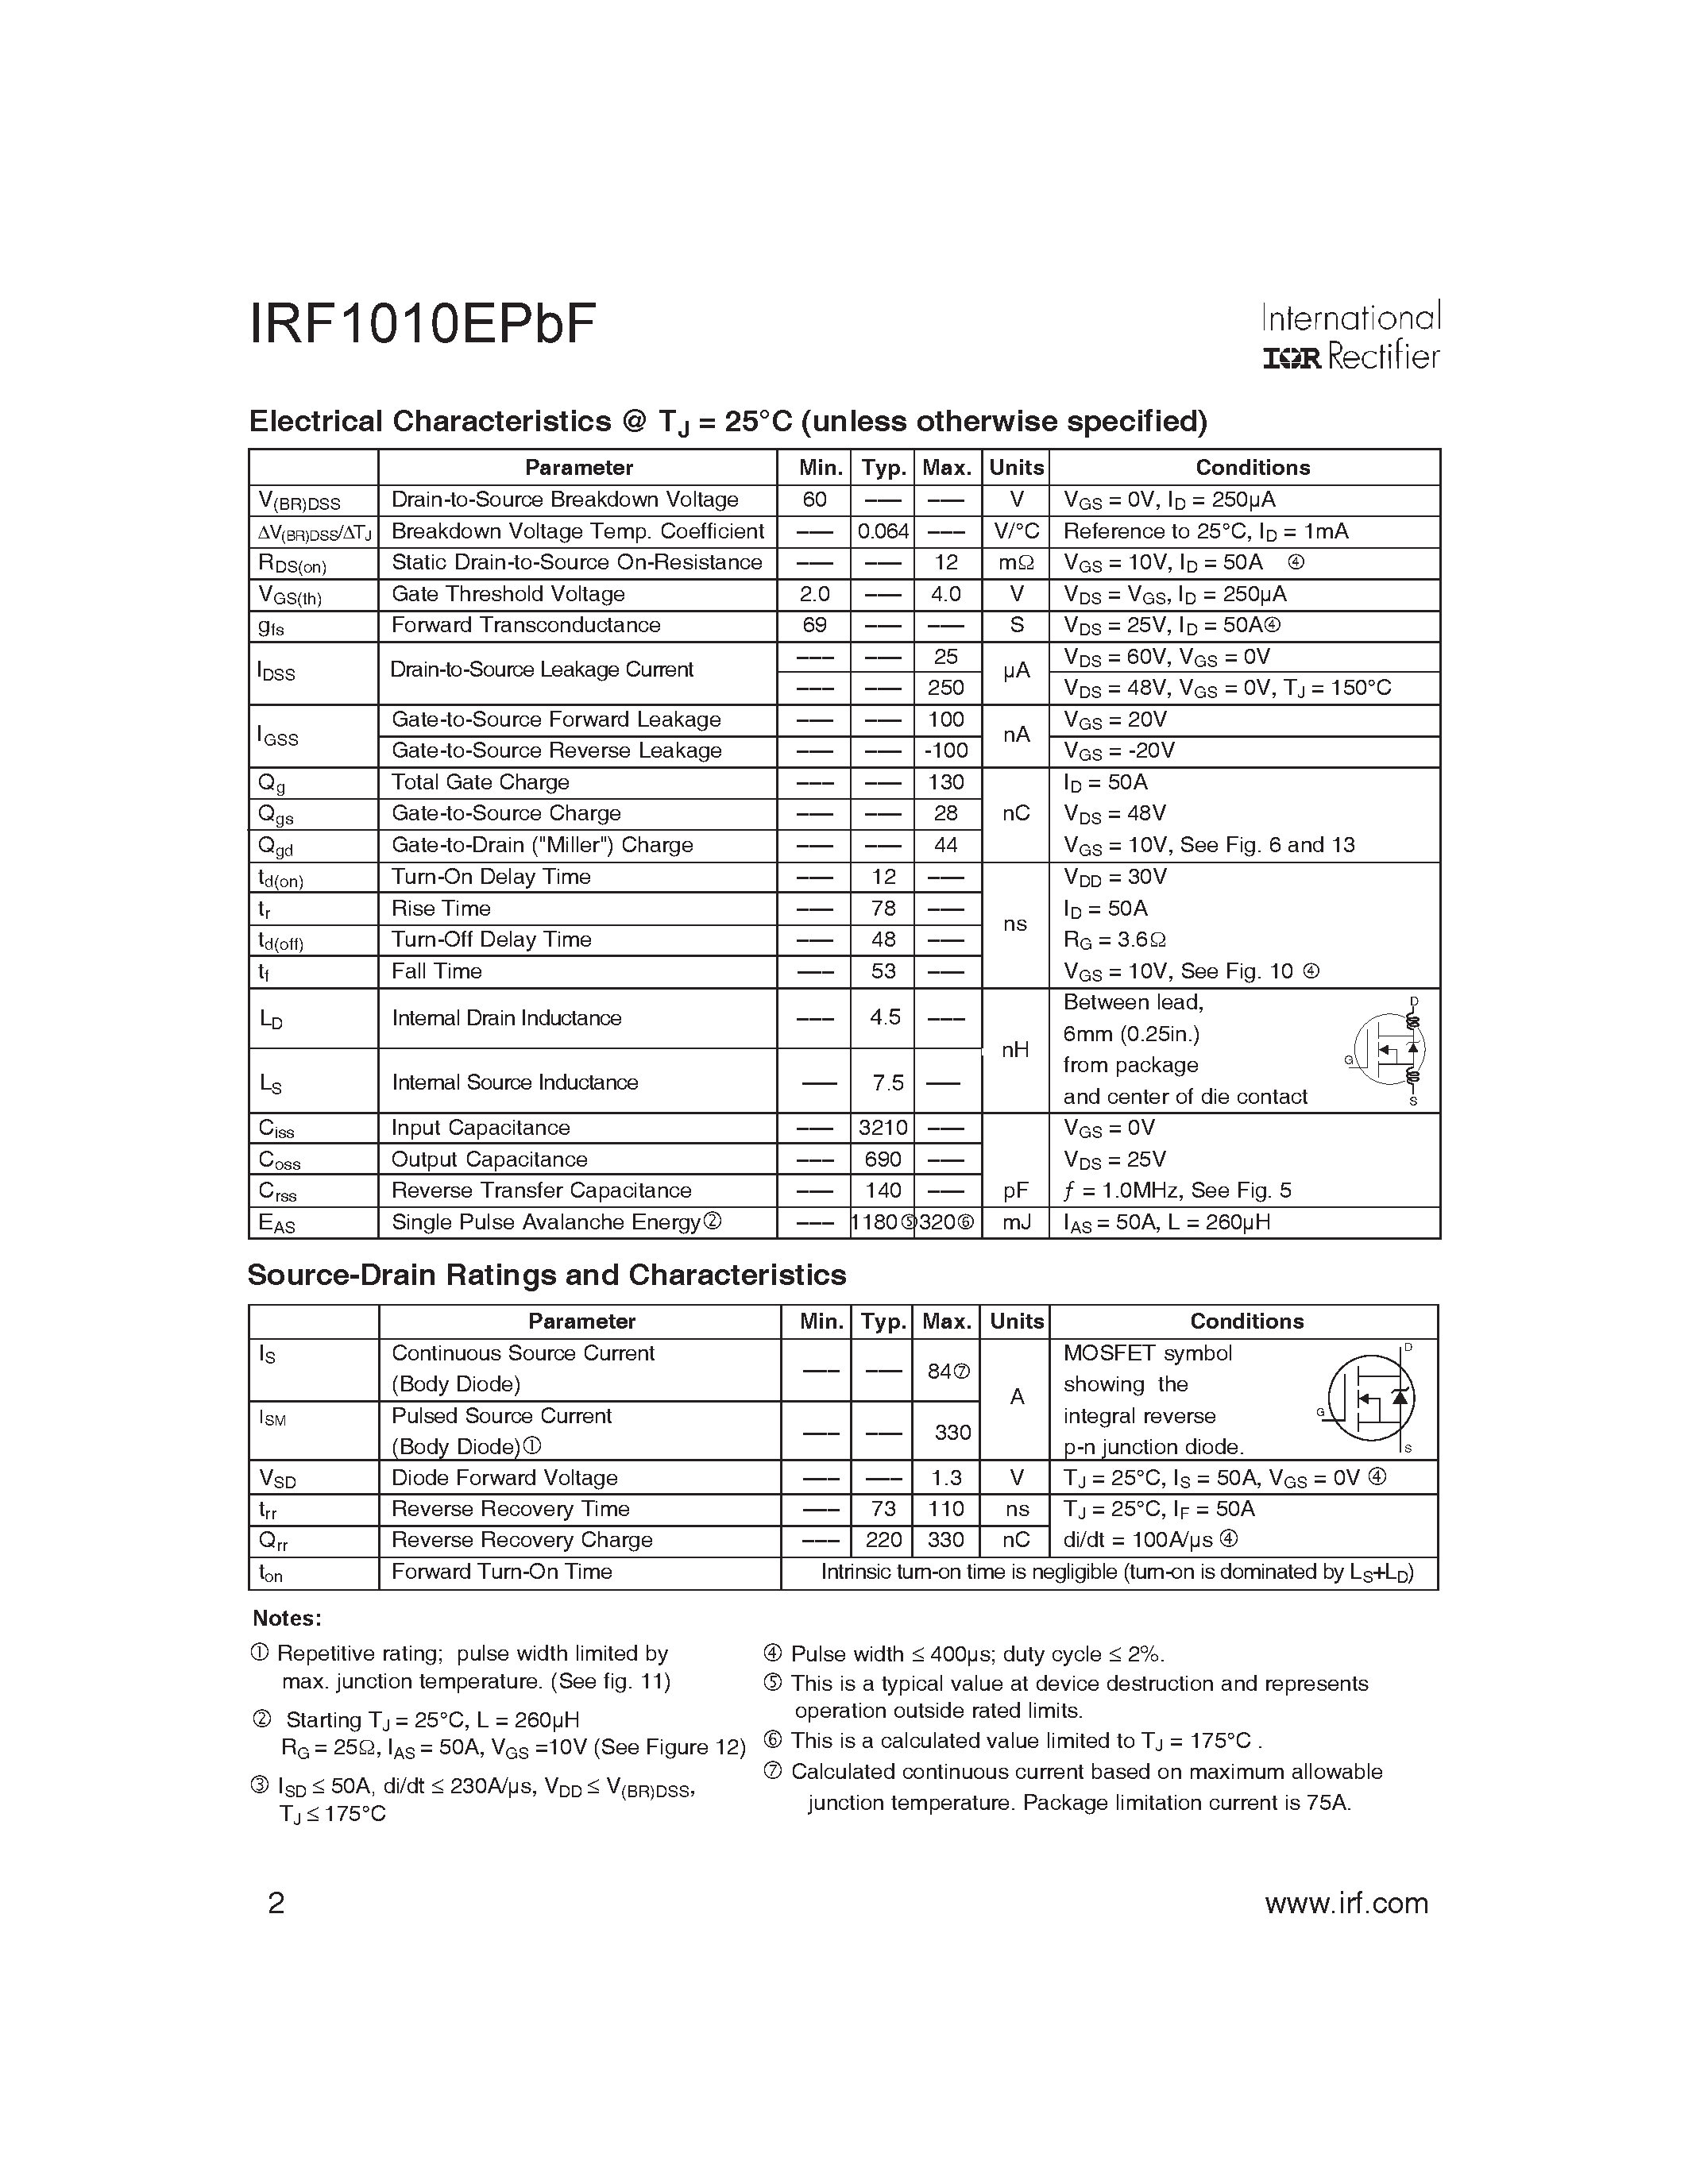 Datasheet IRF1010EPBF - Power MOSFET page 2